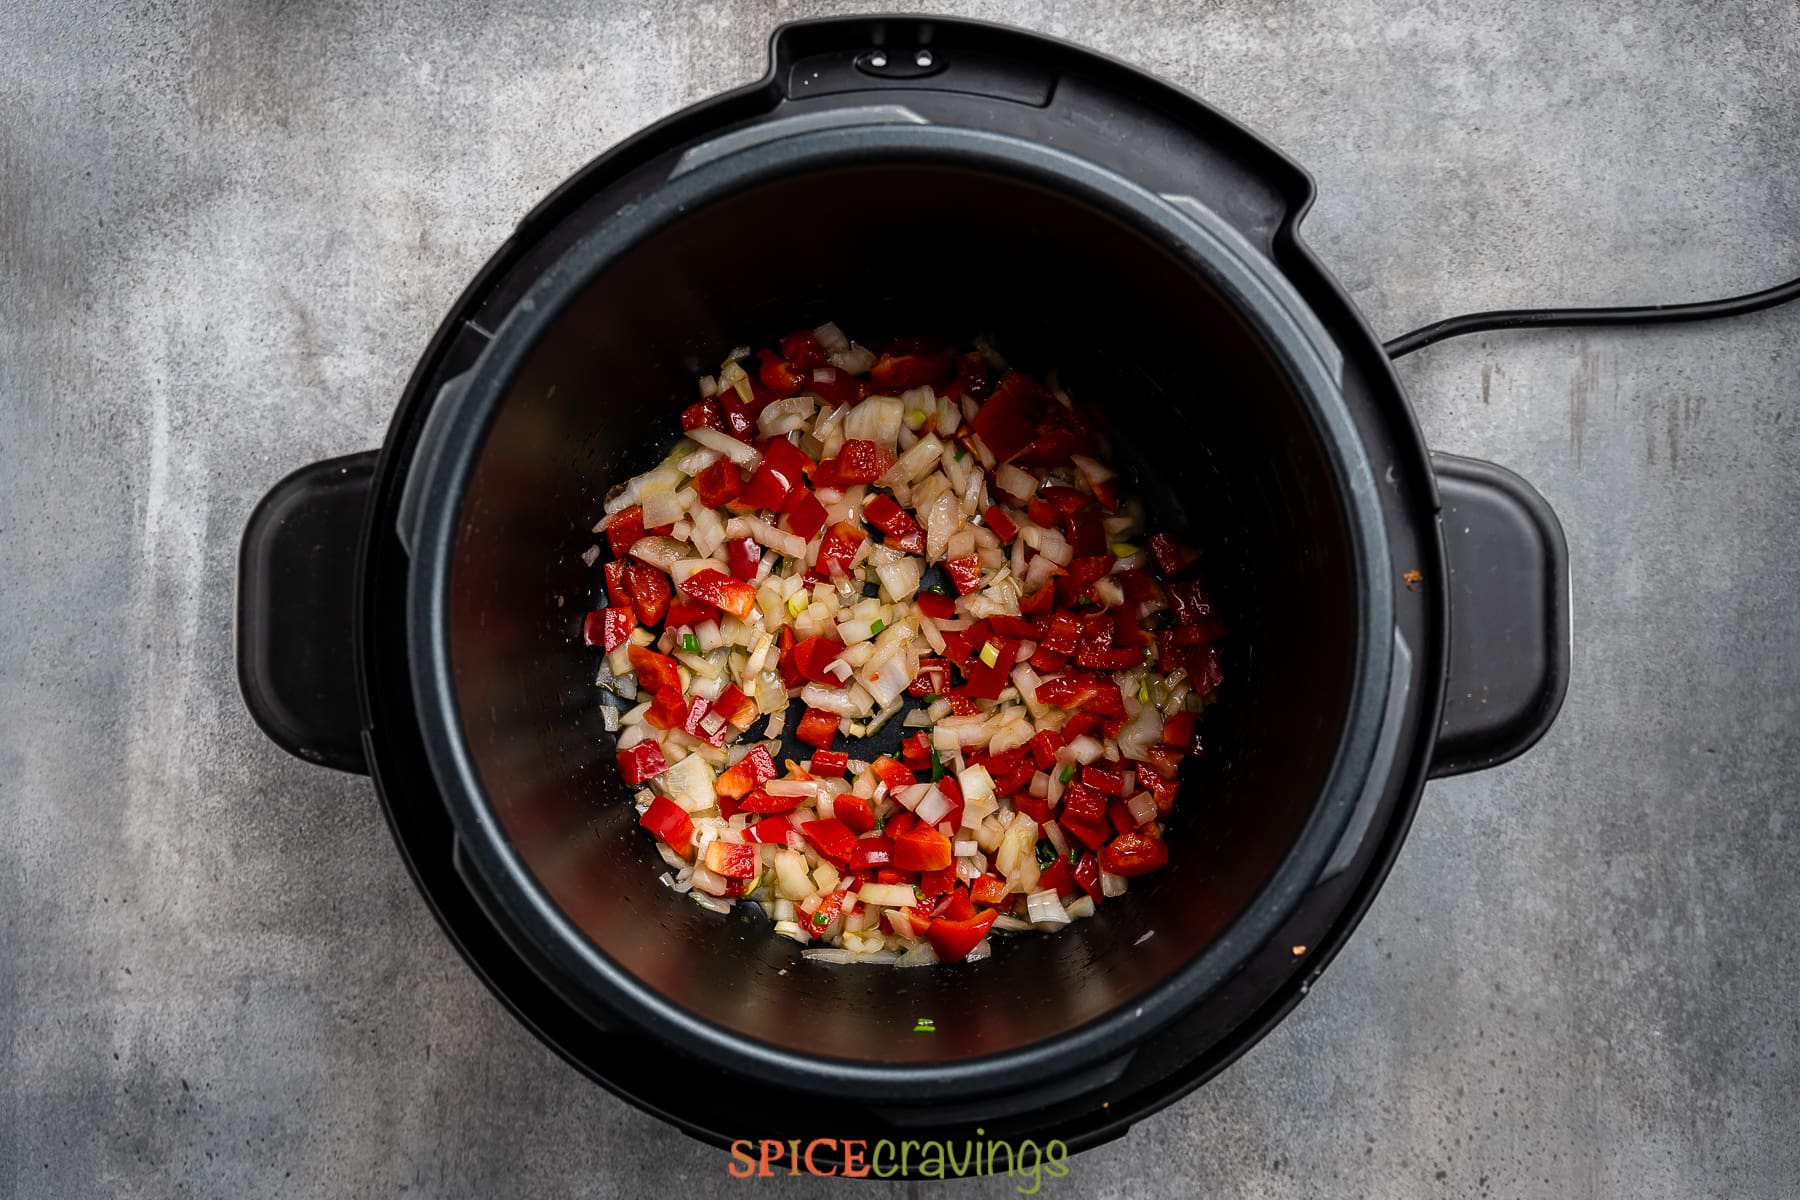 onion and red pepeprs sautéed in the instant pot